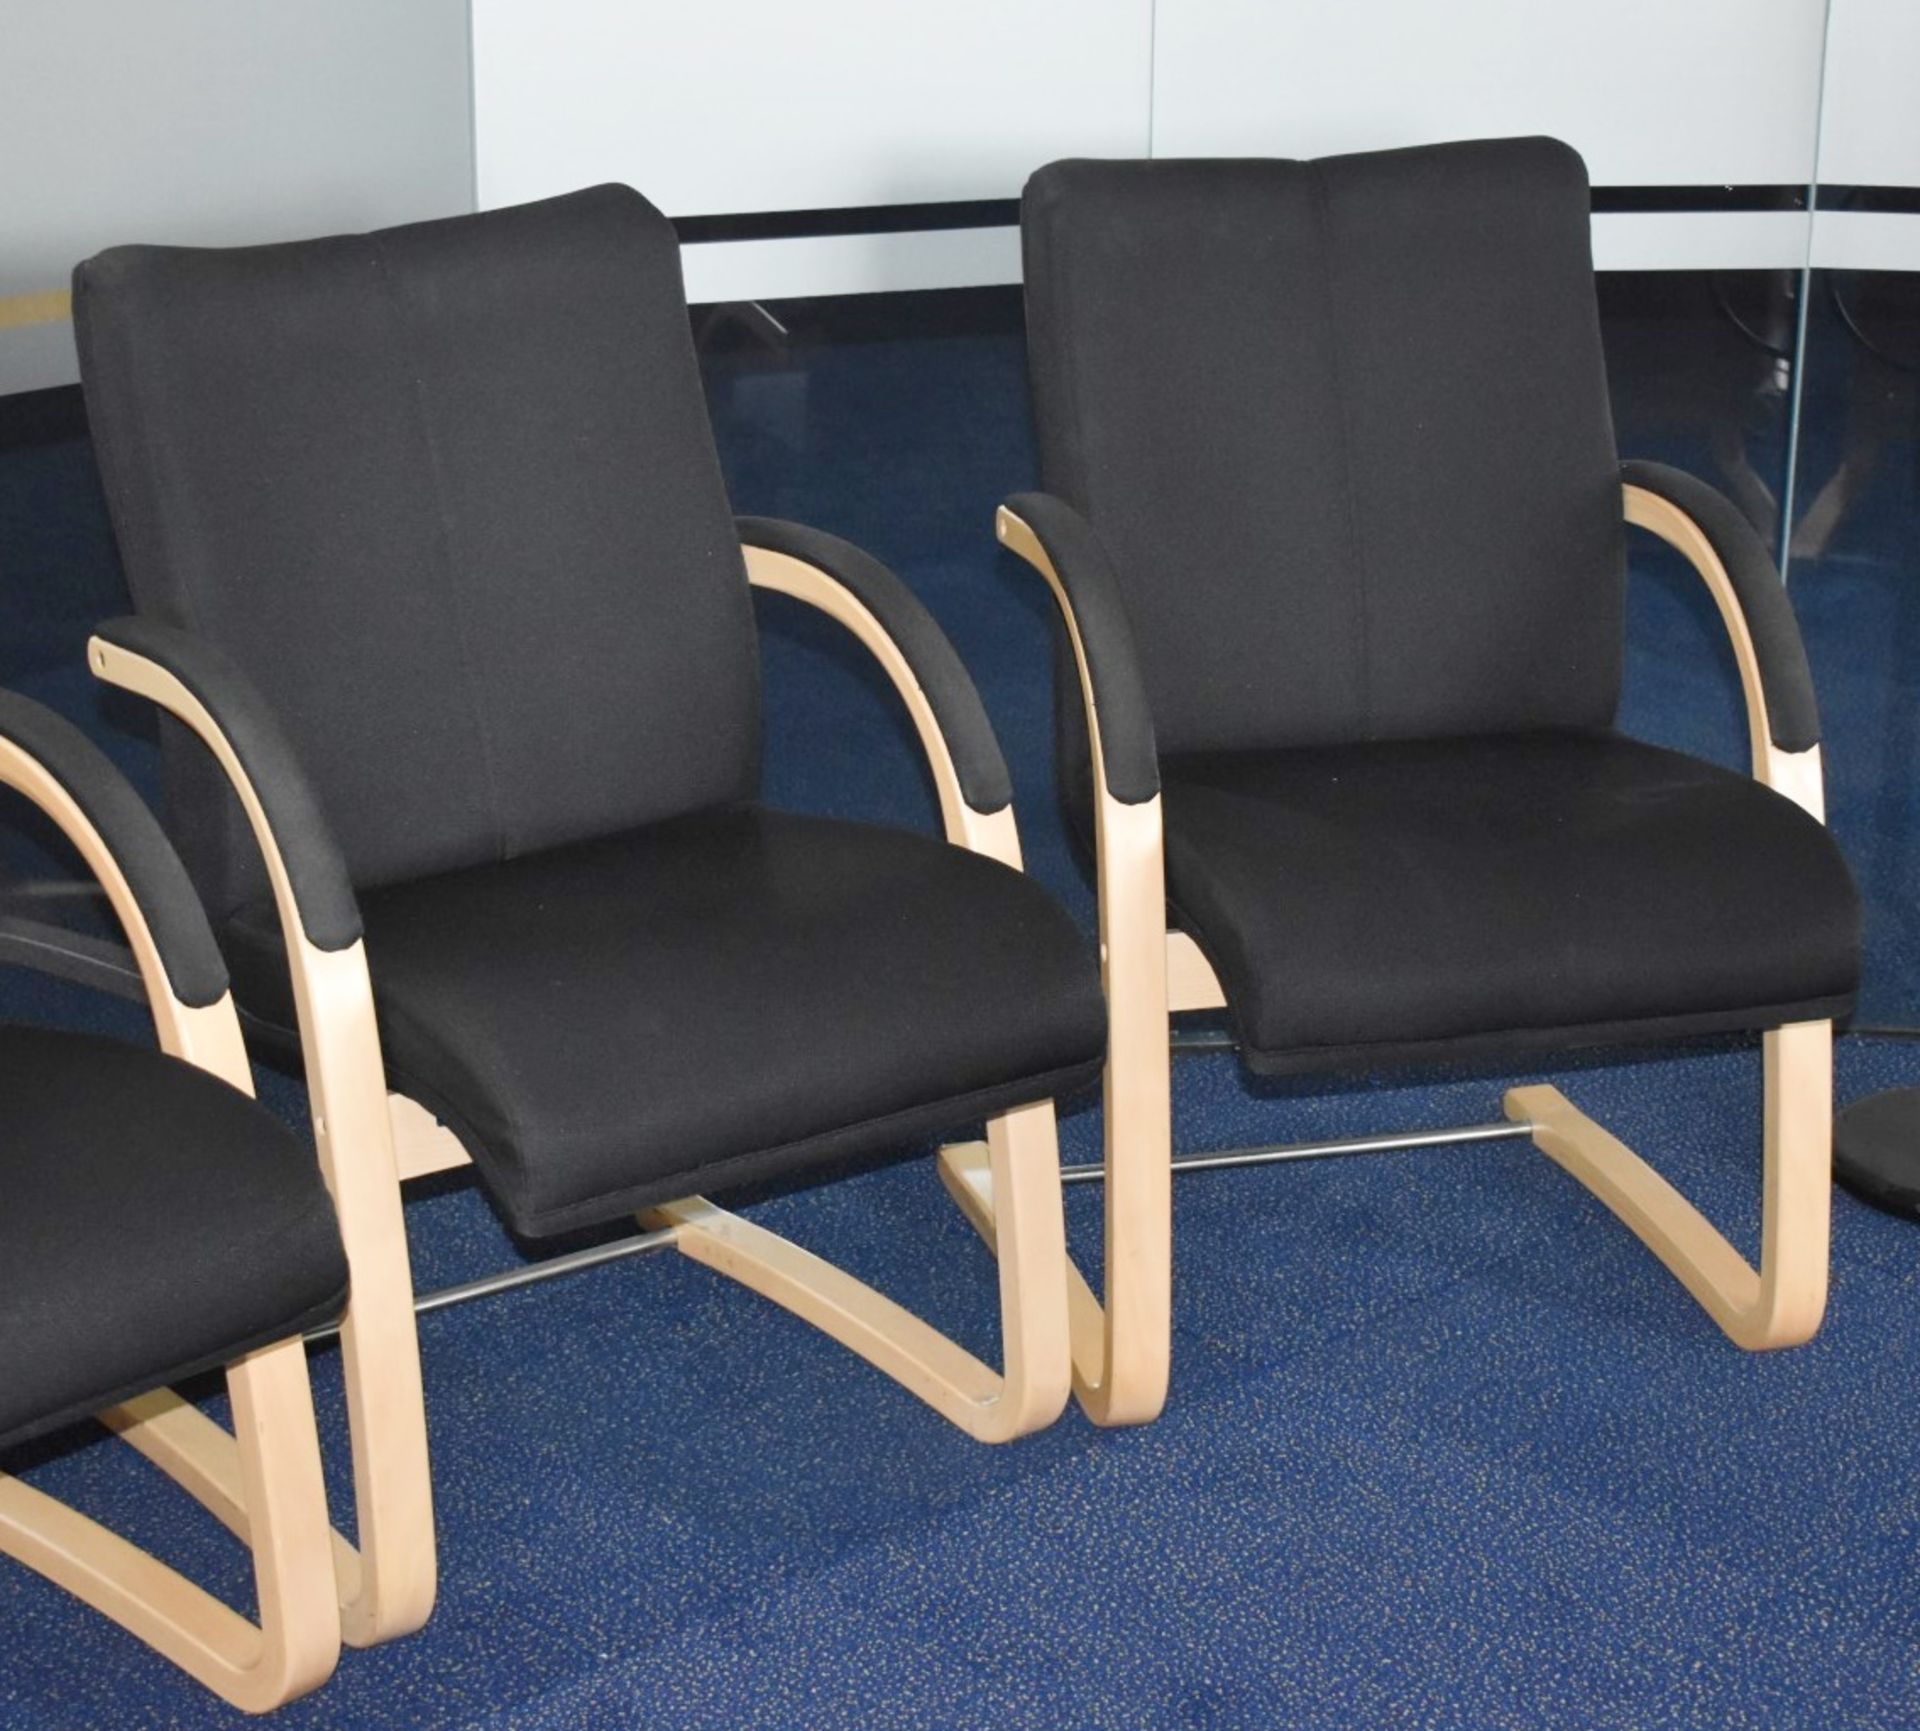 13 x Cantilever Office Meeting Chairs With Bentwood Frames and Black Fabric Seats - H87 x W48 x - Image 7 of 7